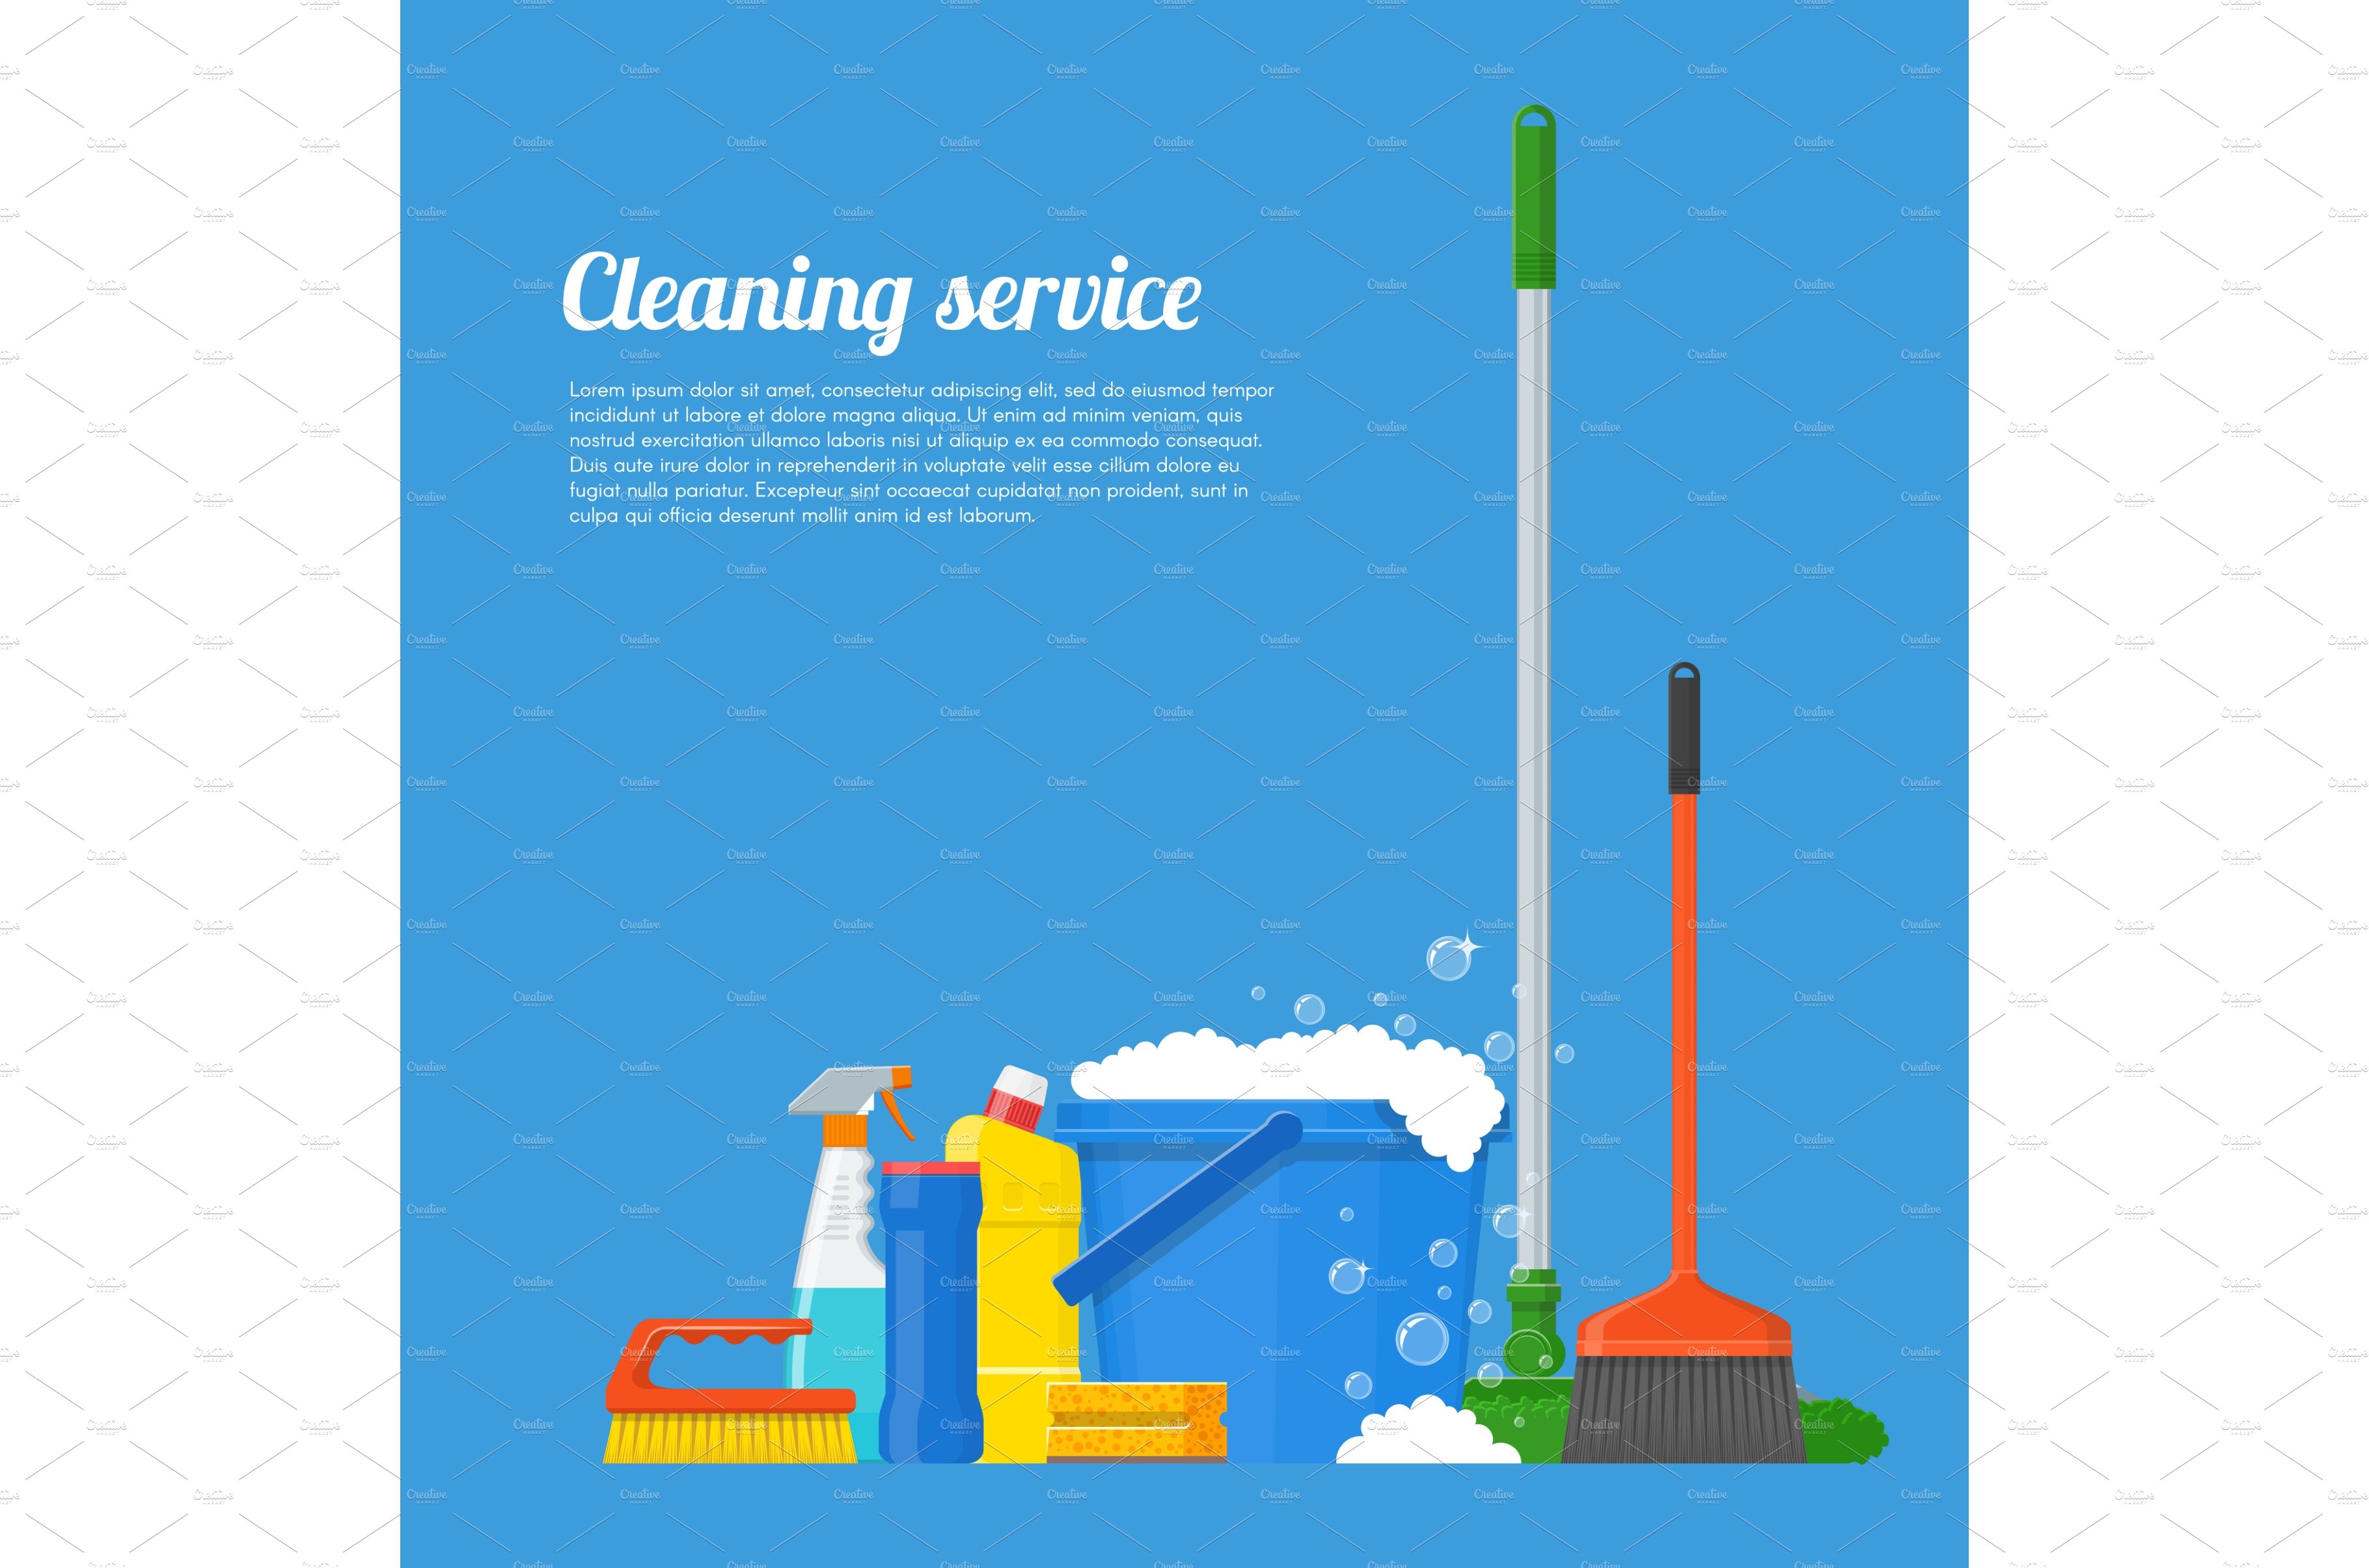 Cleaning service company concept cover image.